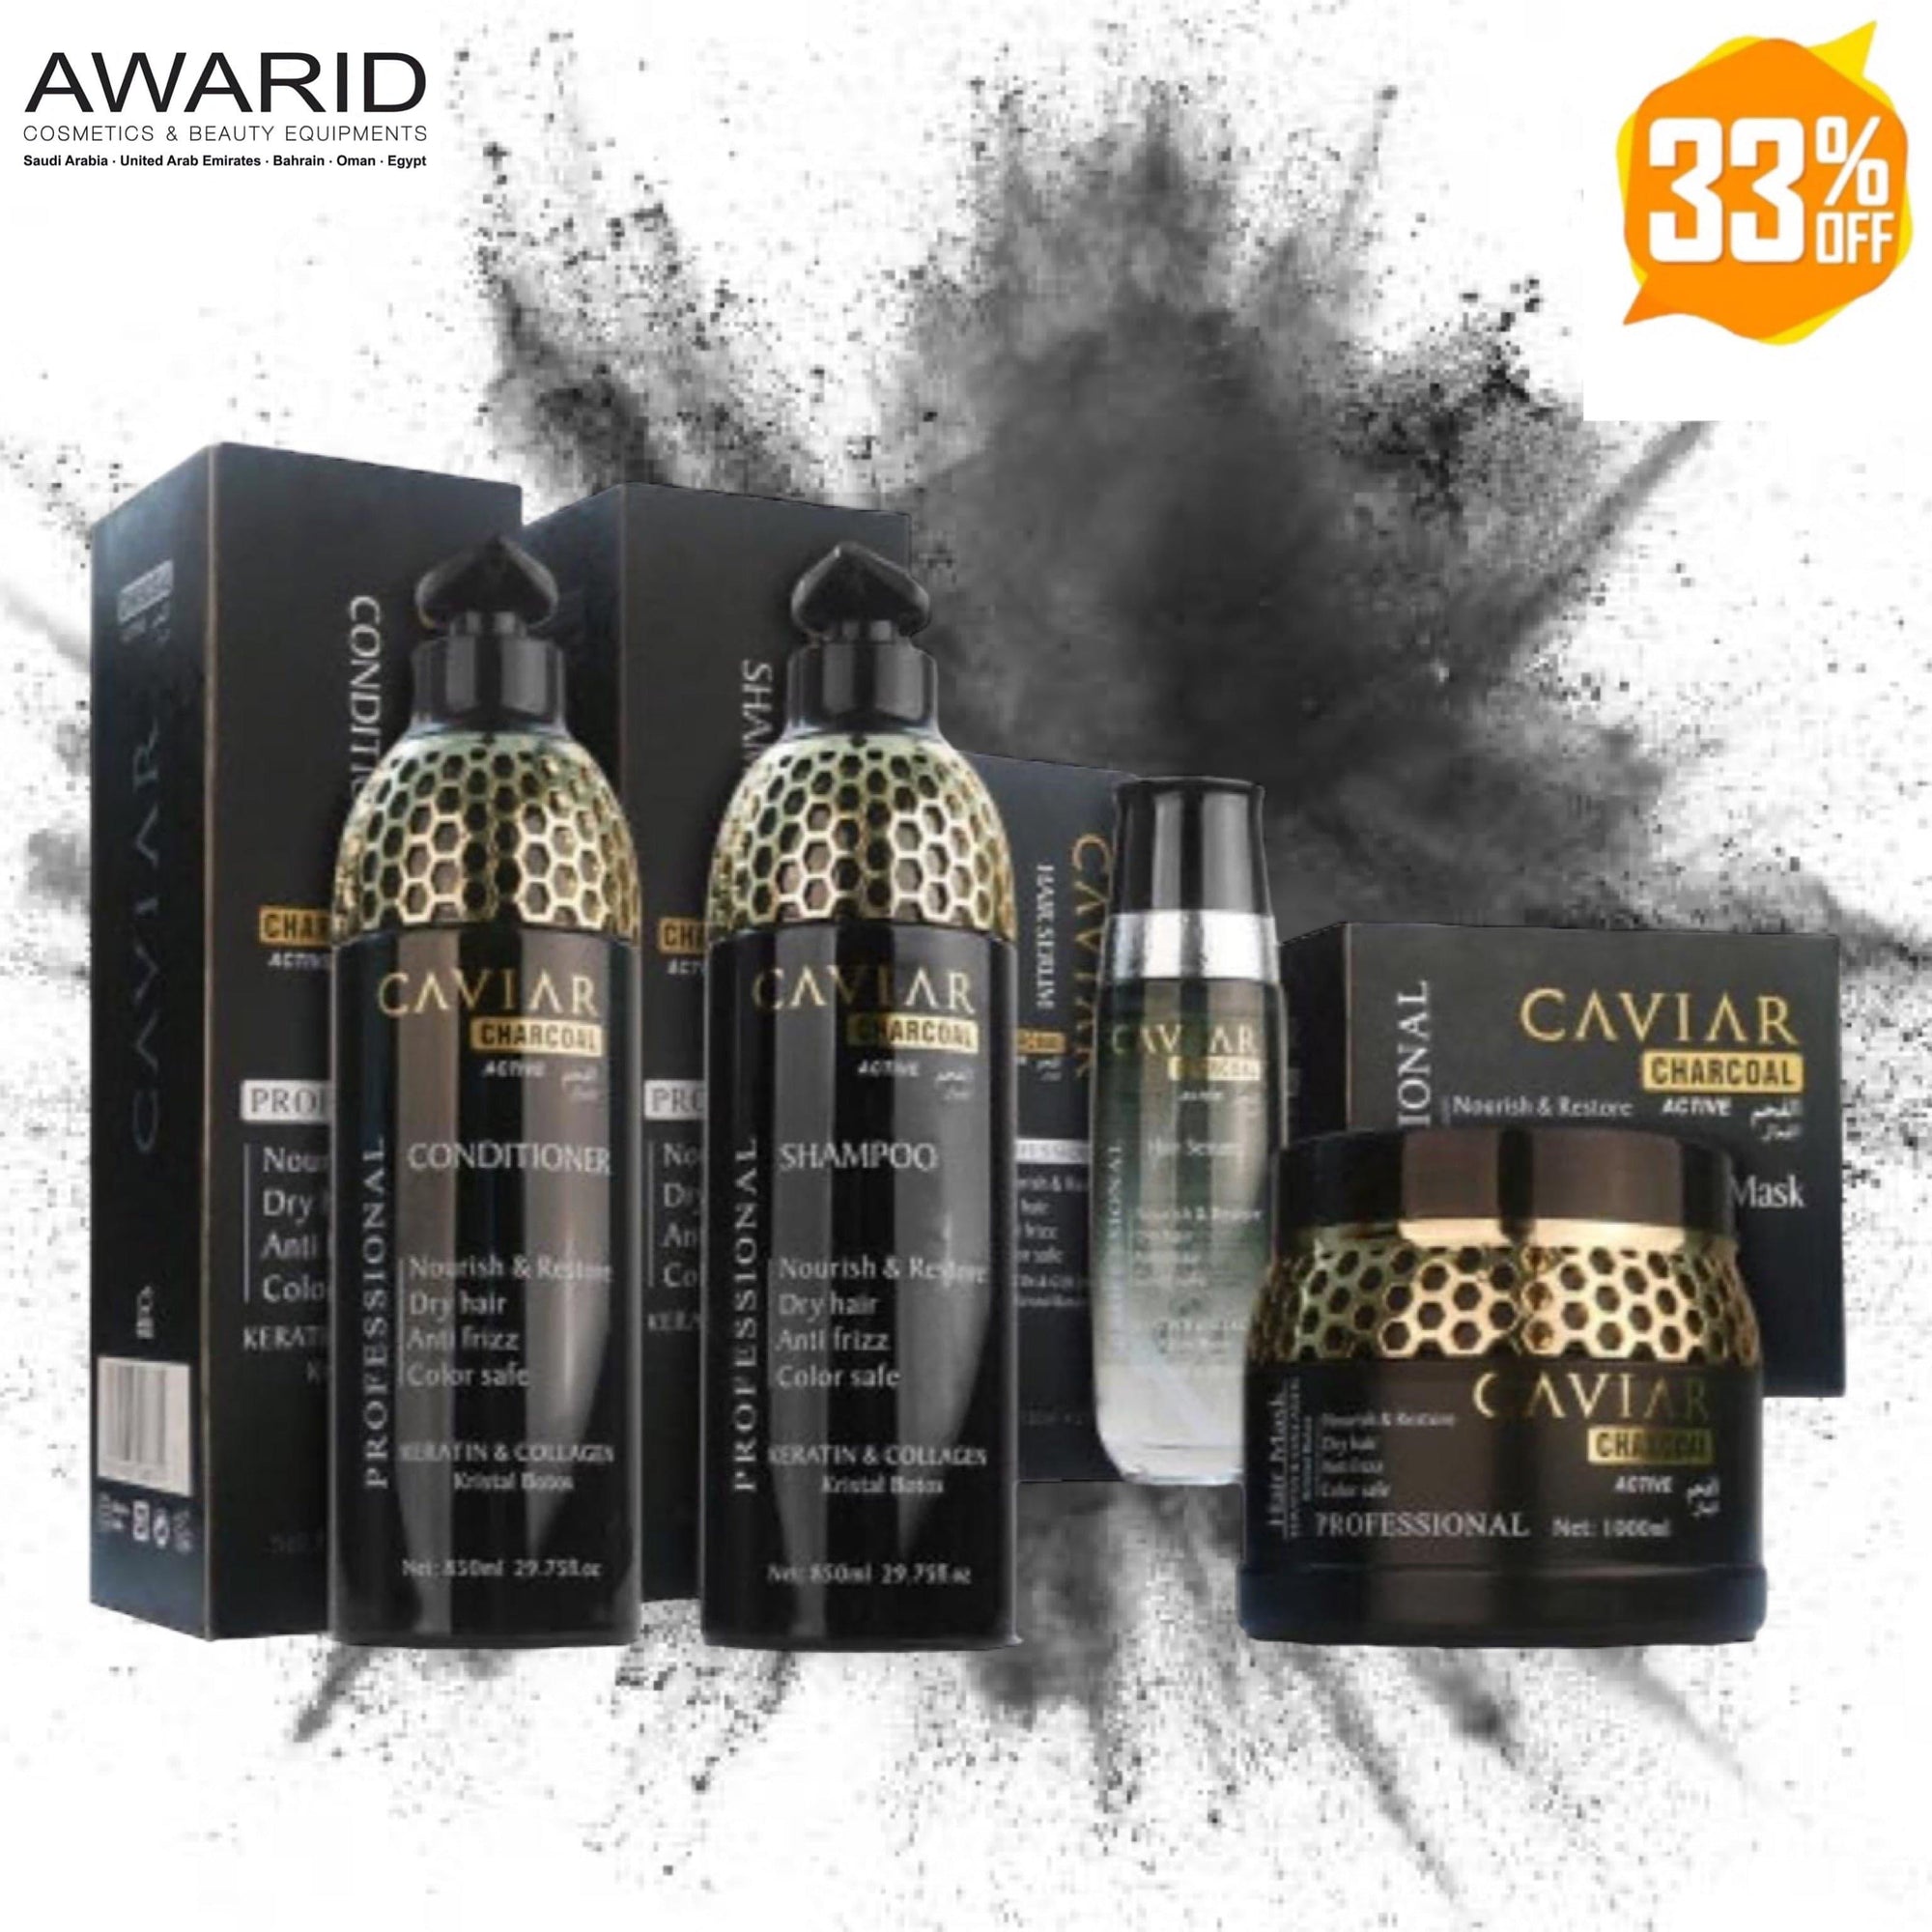 Caviar Charcoal Kit Keratin and Active Collagen 1x4 (Shampoo 850ml, Conditioner 850ml, Hair Mask 1000ml And Serum 120ml)